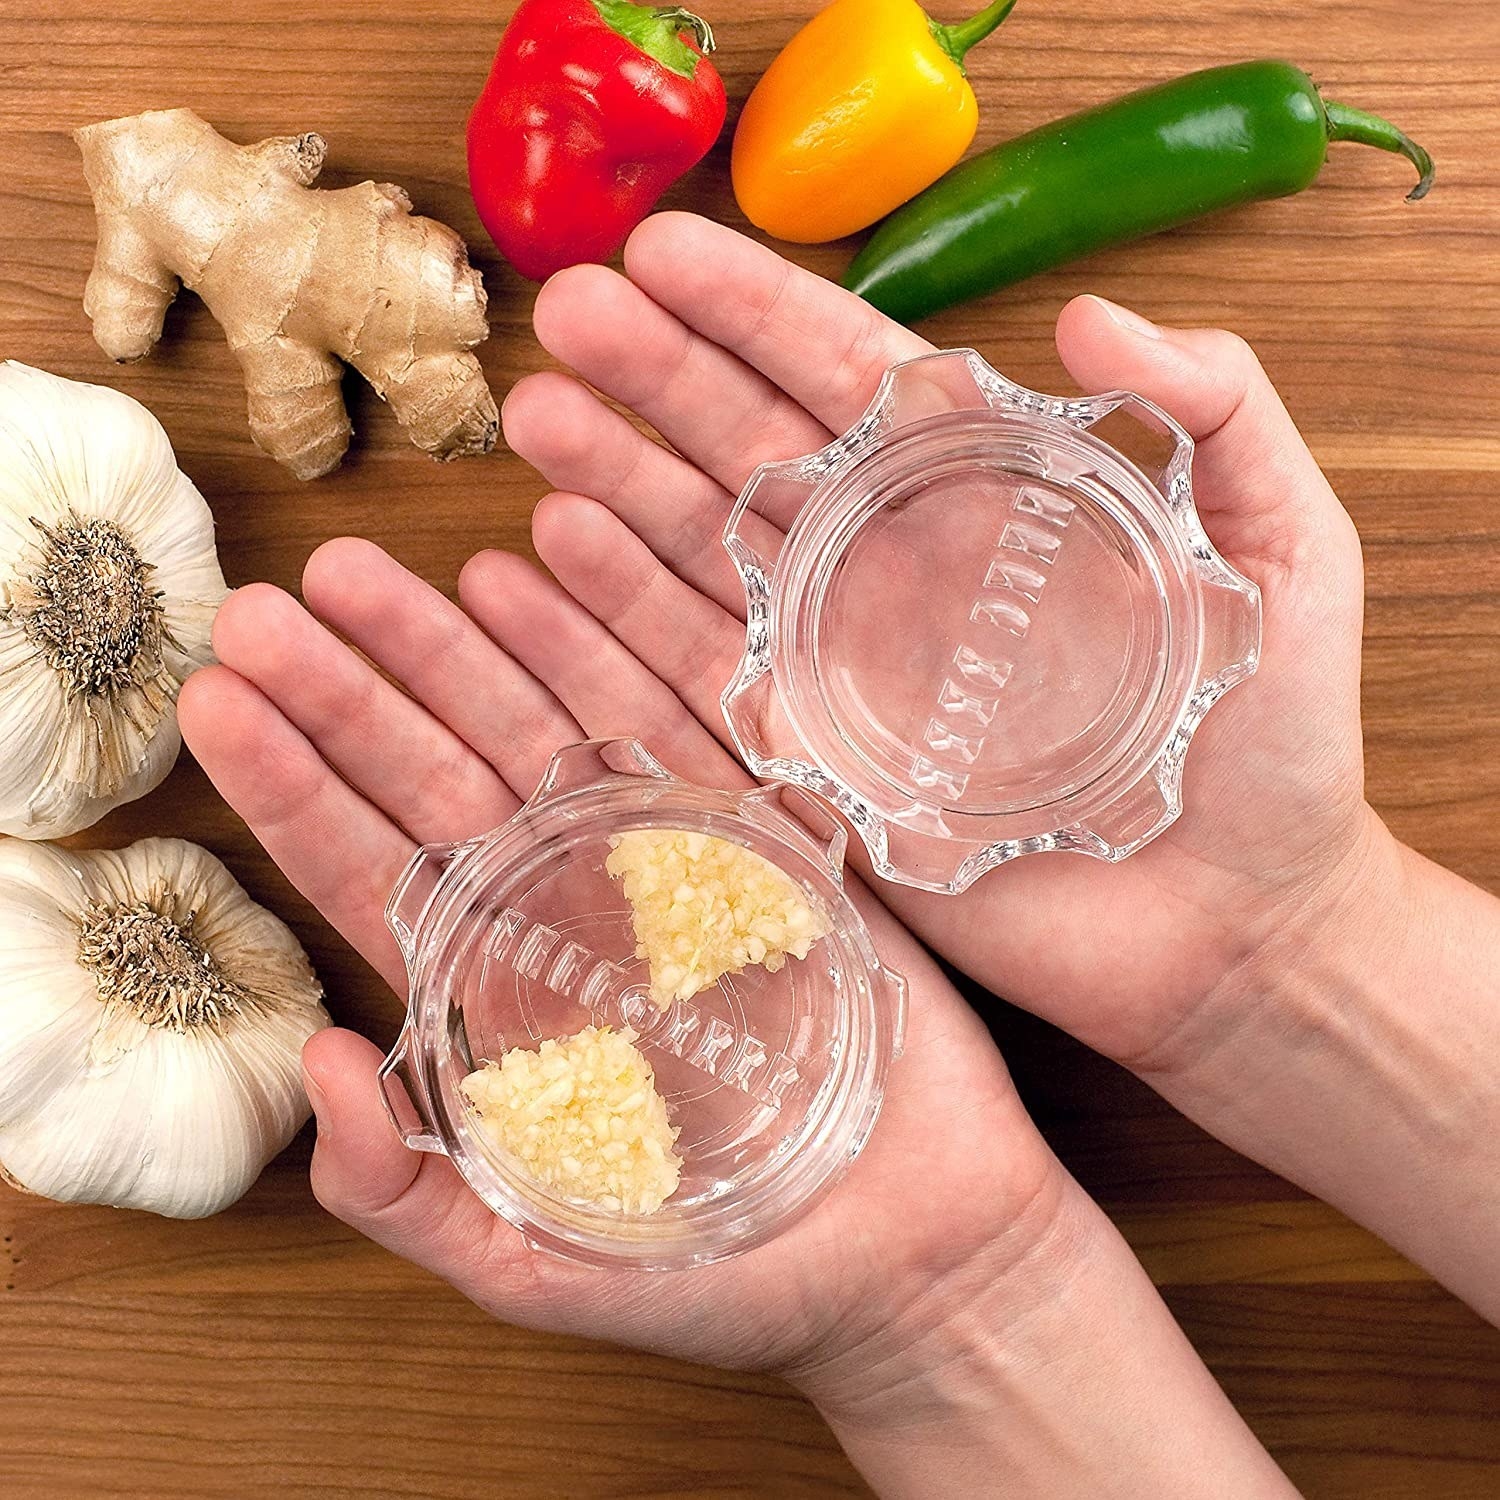 A pair of hands holding the garlic twist, which is made up of two transparent gear-shaped pieces with rows of teeth inside 